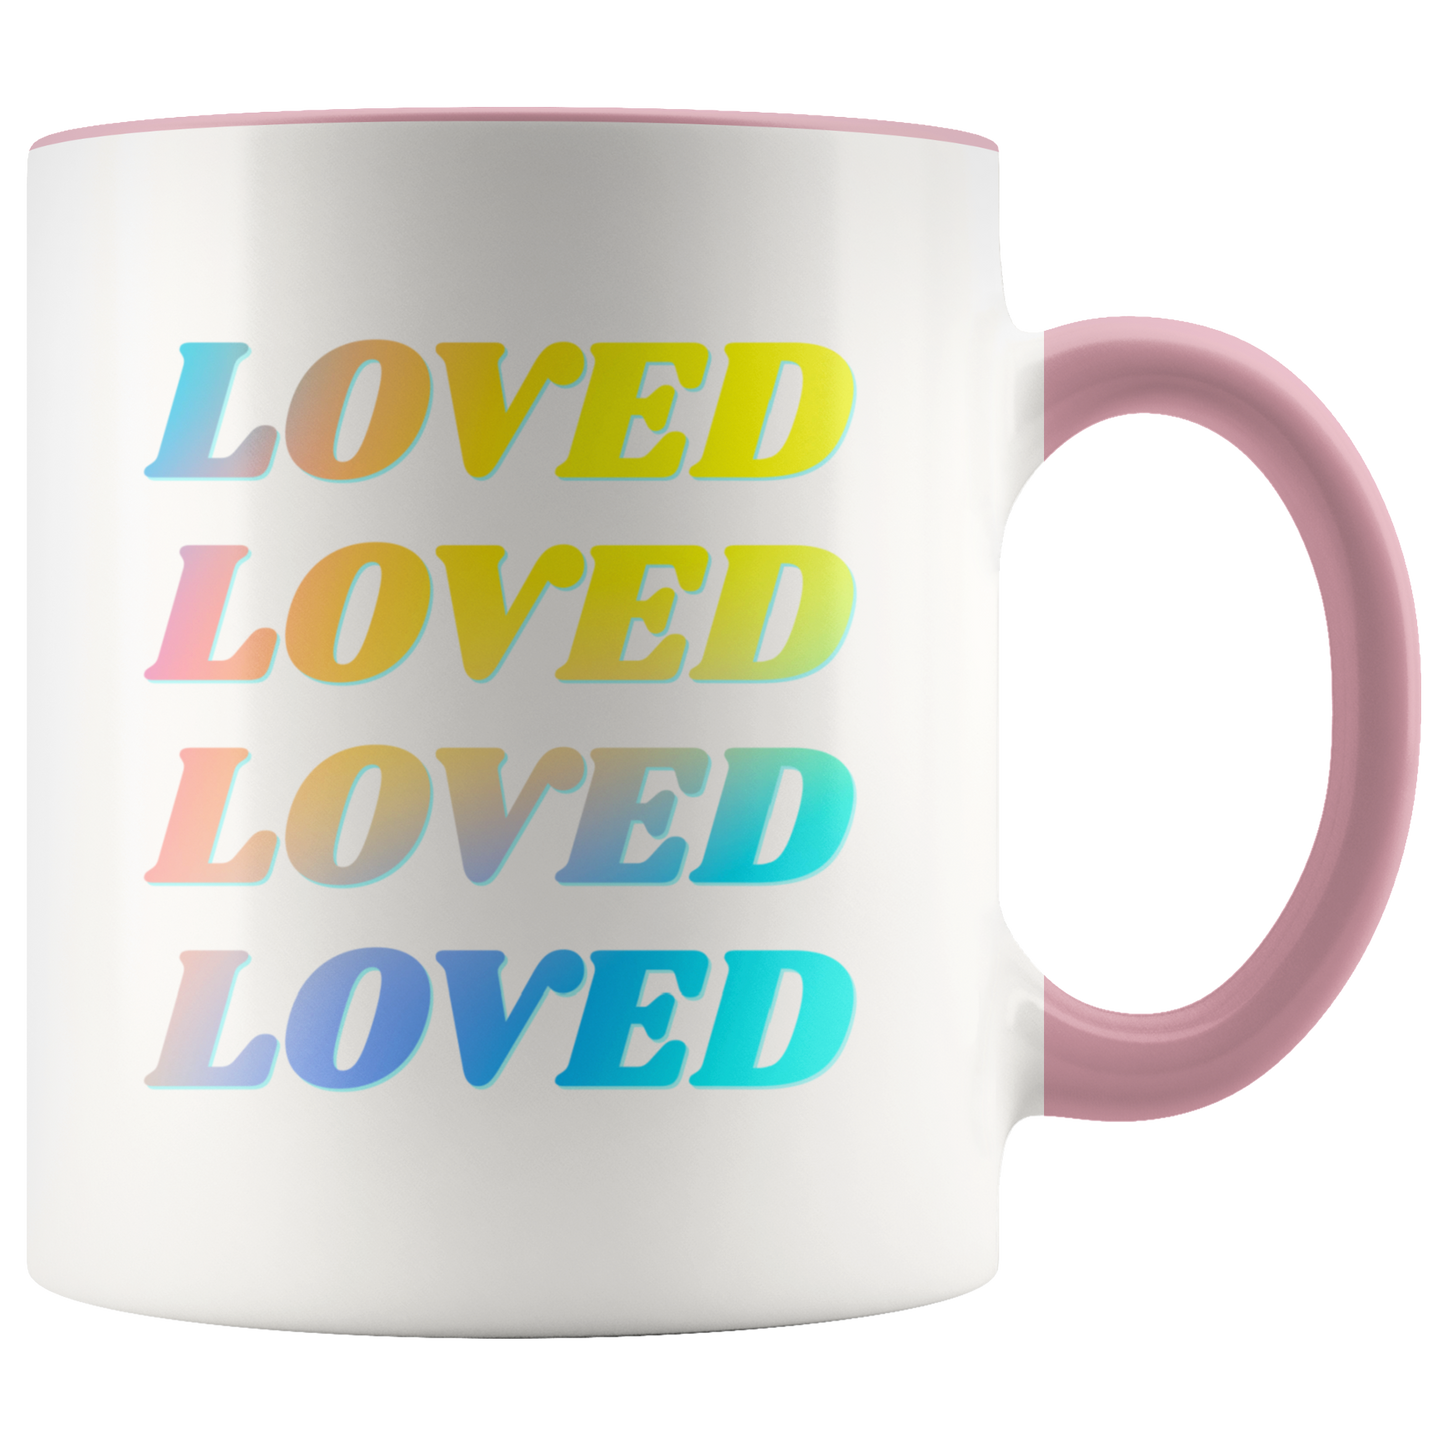 Loved Coffee Mug Christian Quote Coffee Gift For Friend Love Cup